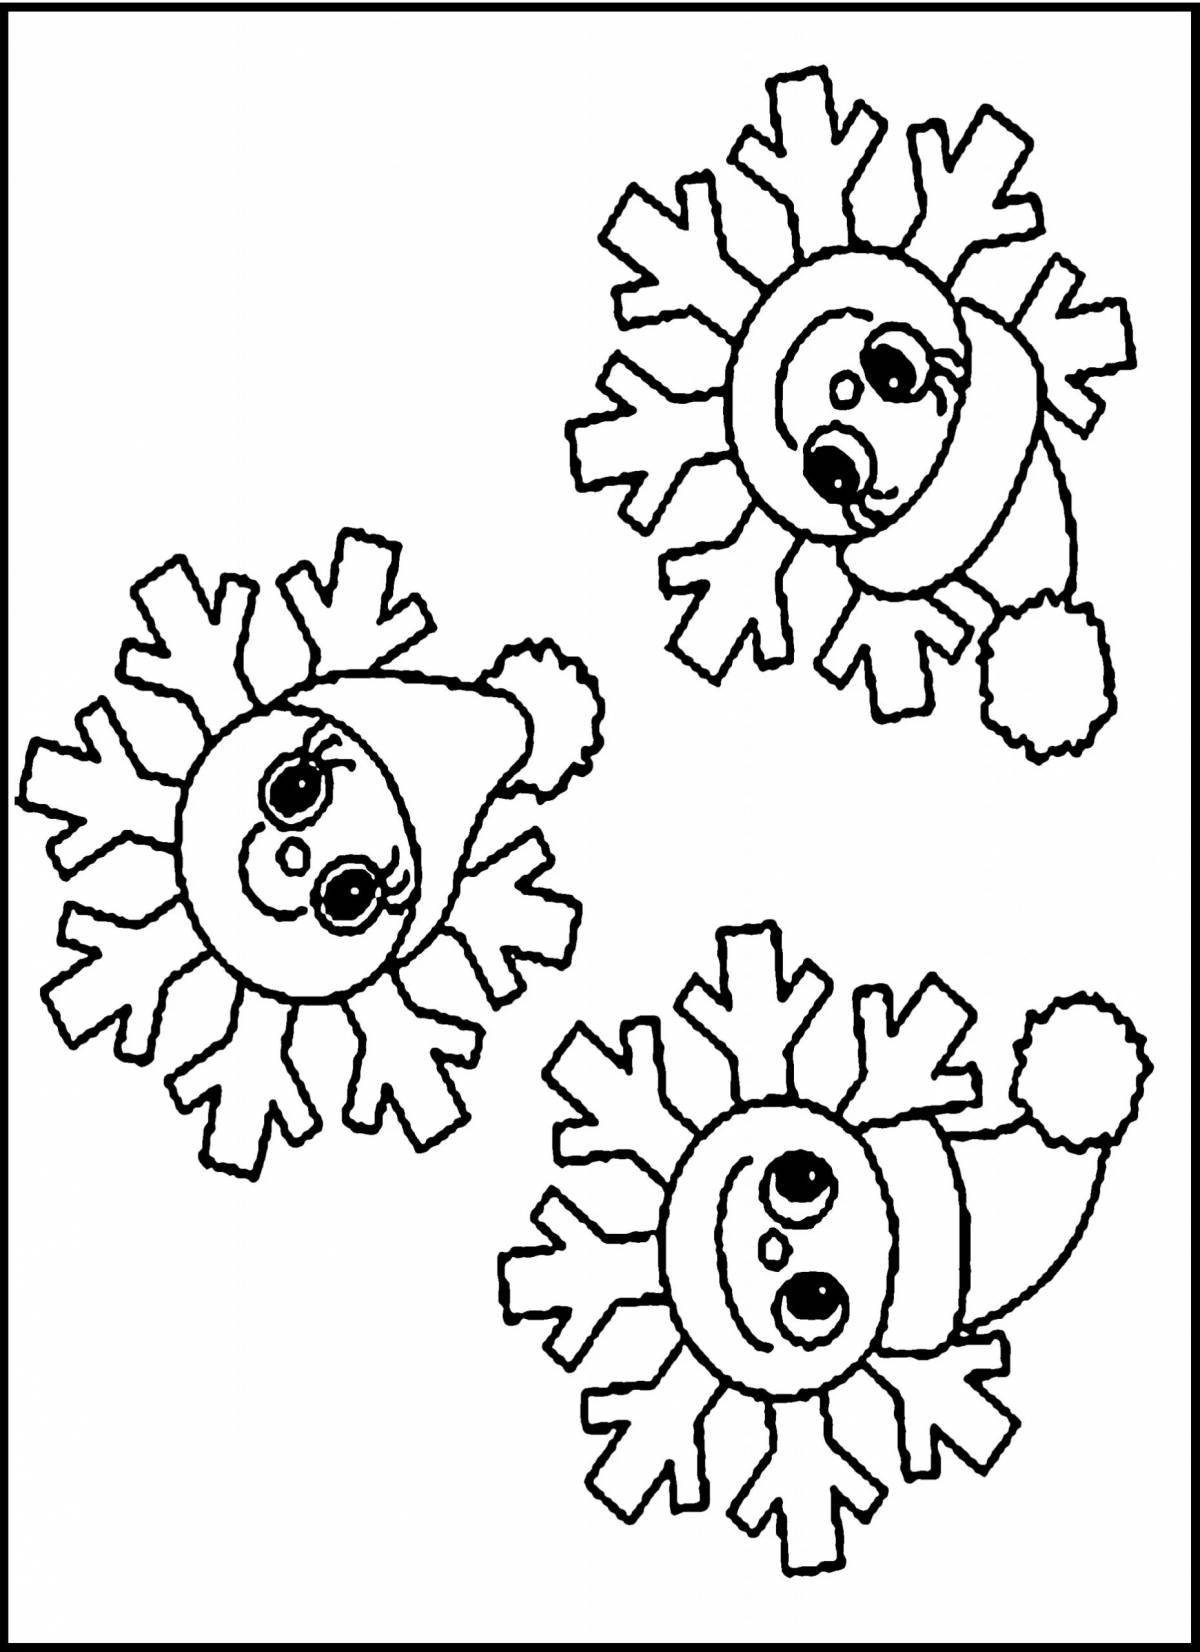 Fun coloring snowflakes for children 4-5 years old in kindergarten